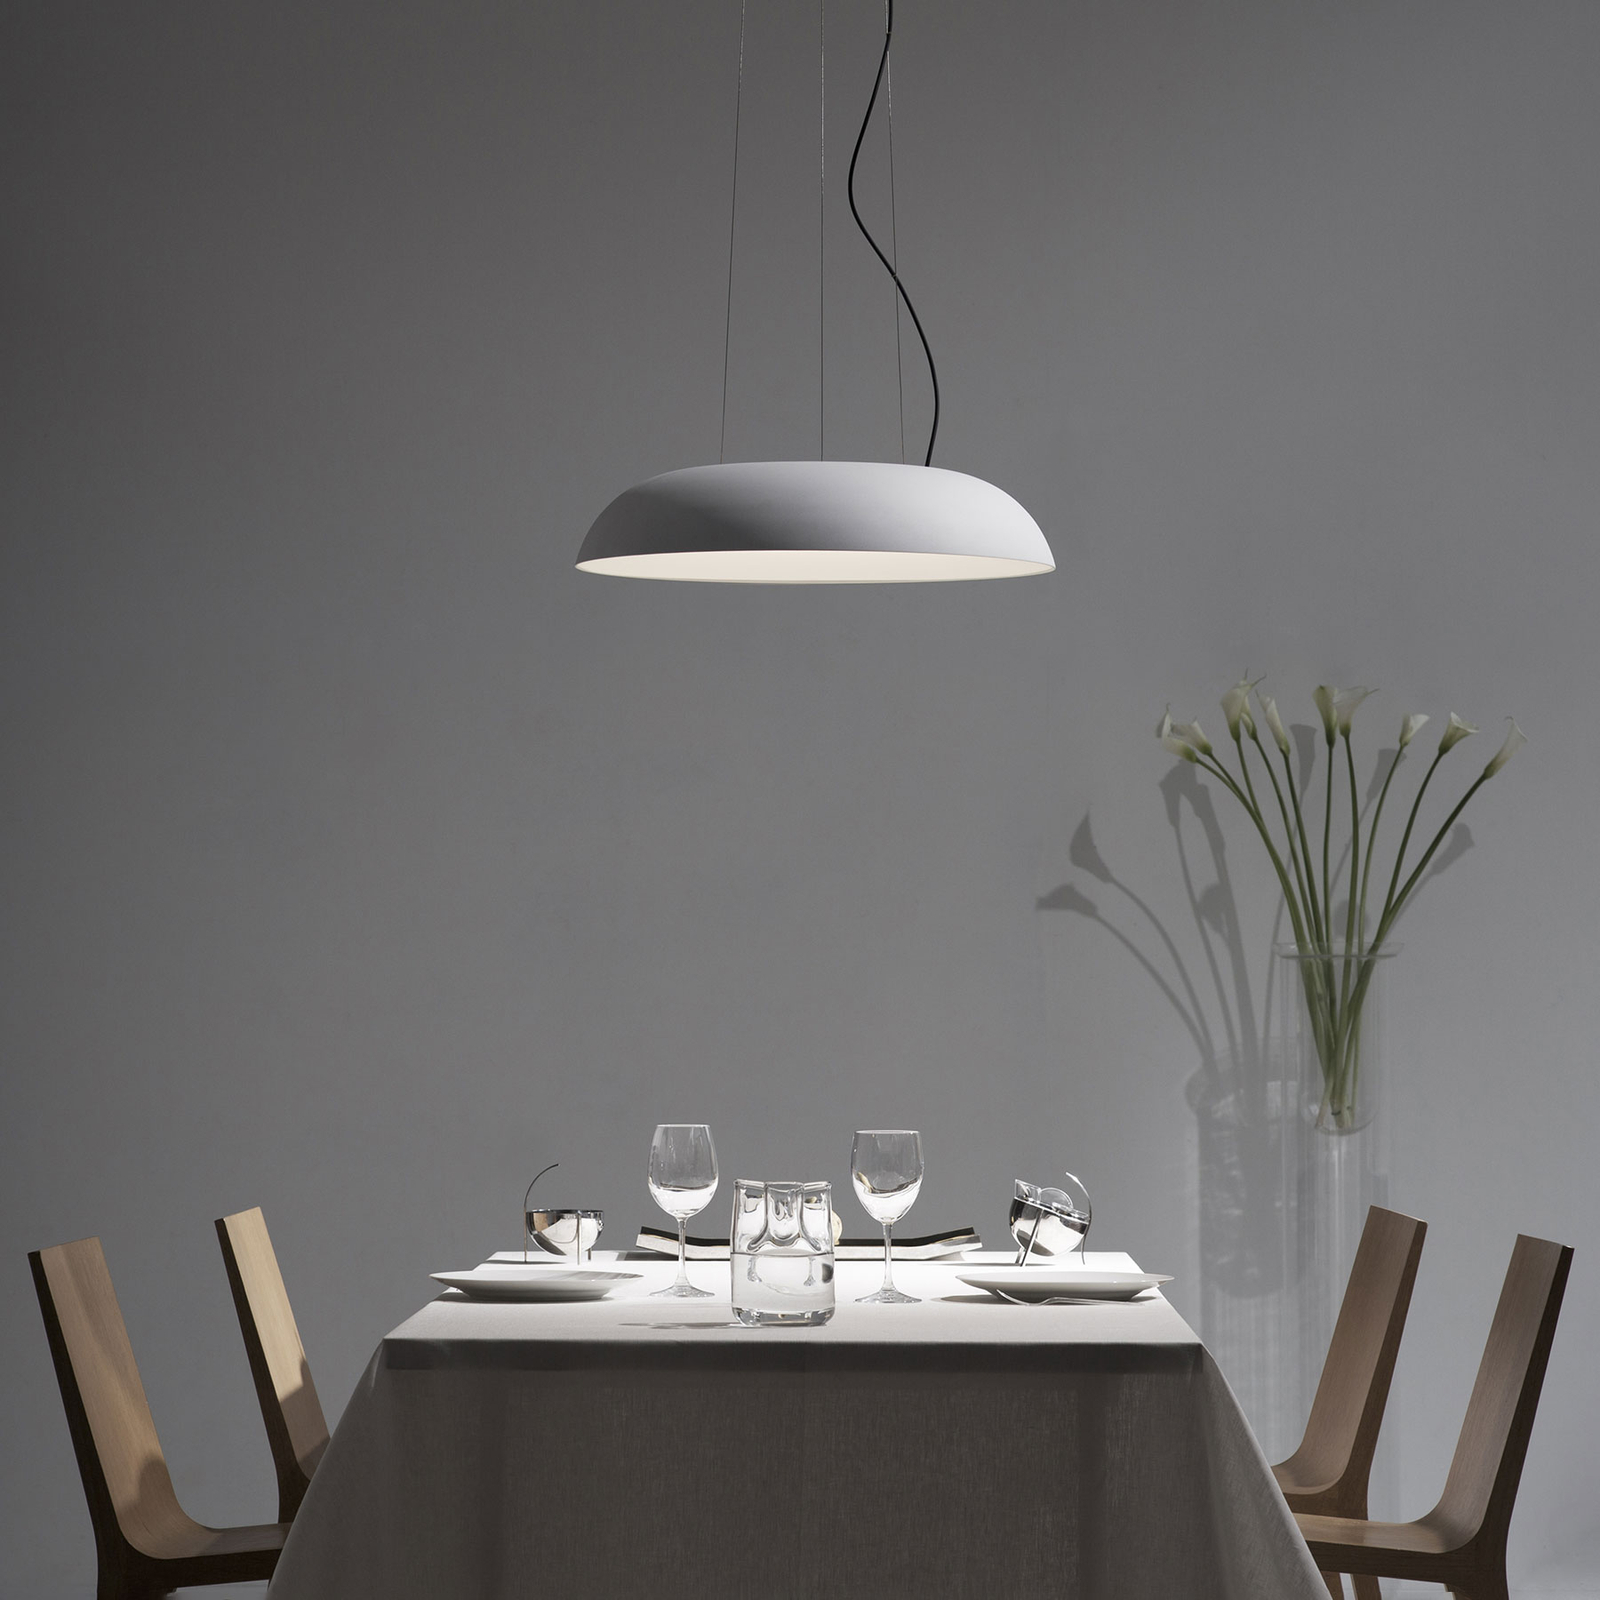 Martinelli Luce Maggiolone hanglamp 930 60cm wit